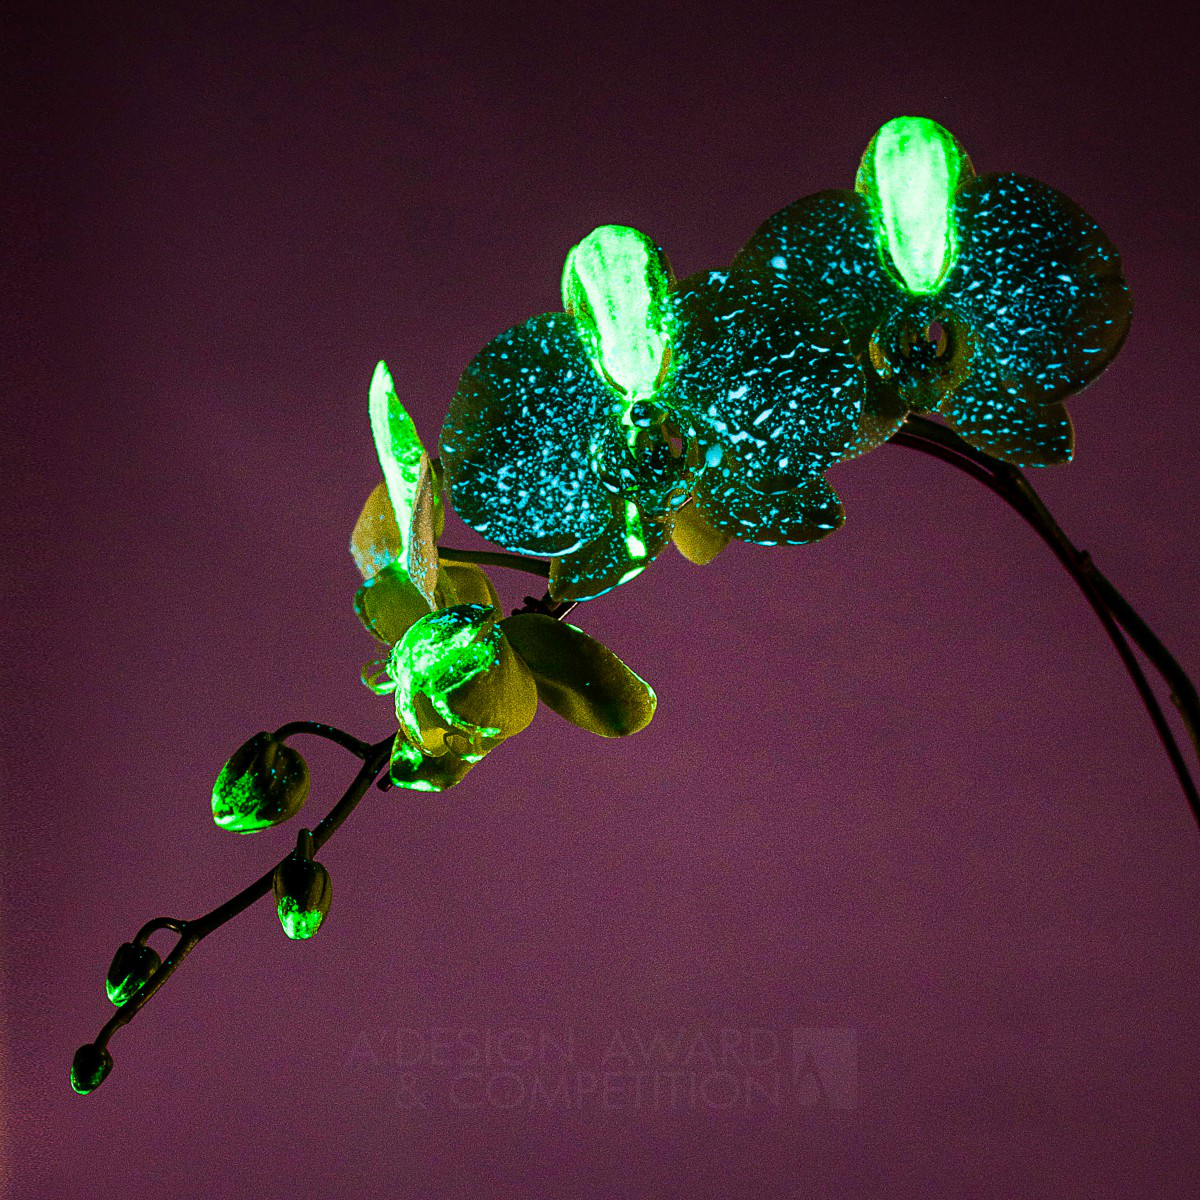 Revolutionary Biotechnology Creates Glowing Orchids Inspired by Starry Night